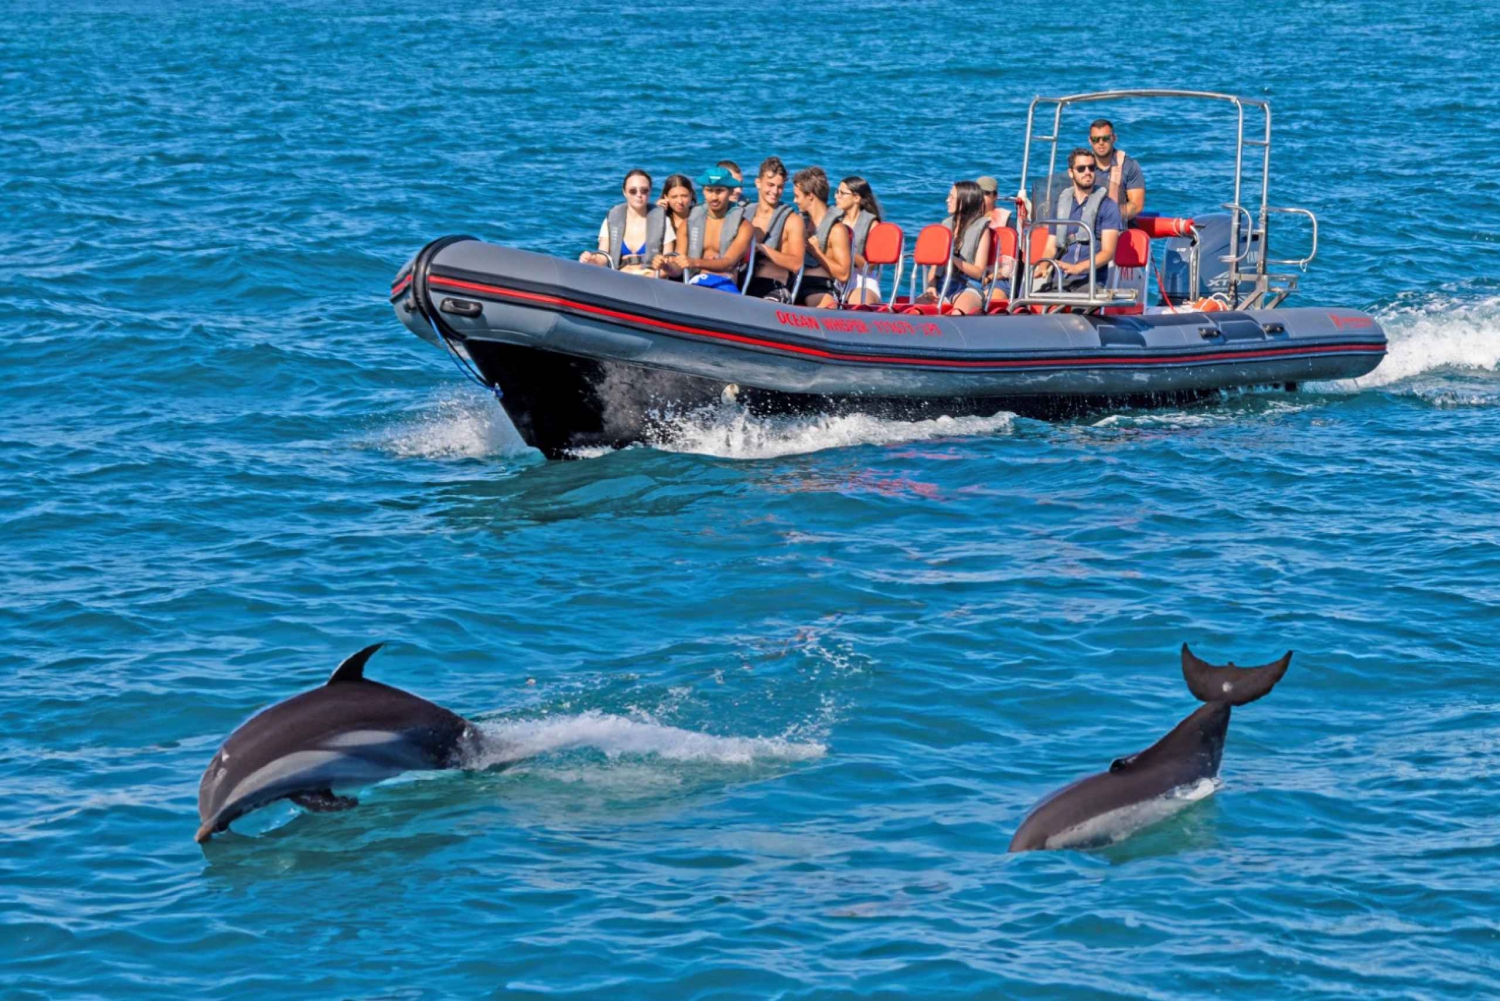 Portimão: Dolphin Watching Tour with Marine Biologist